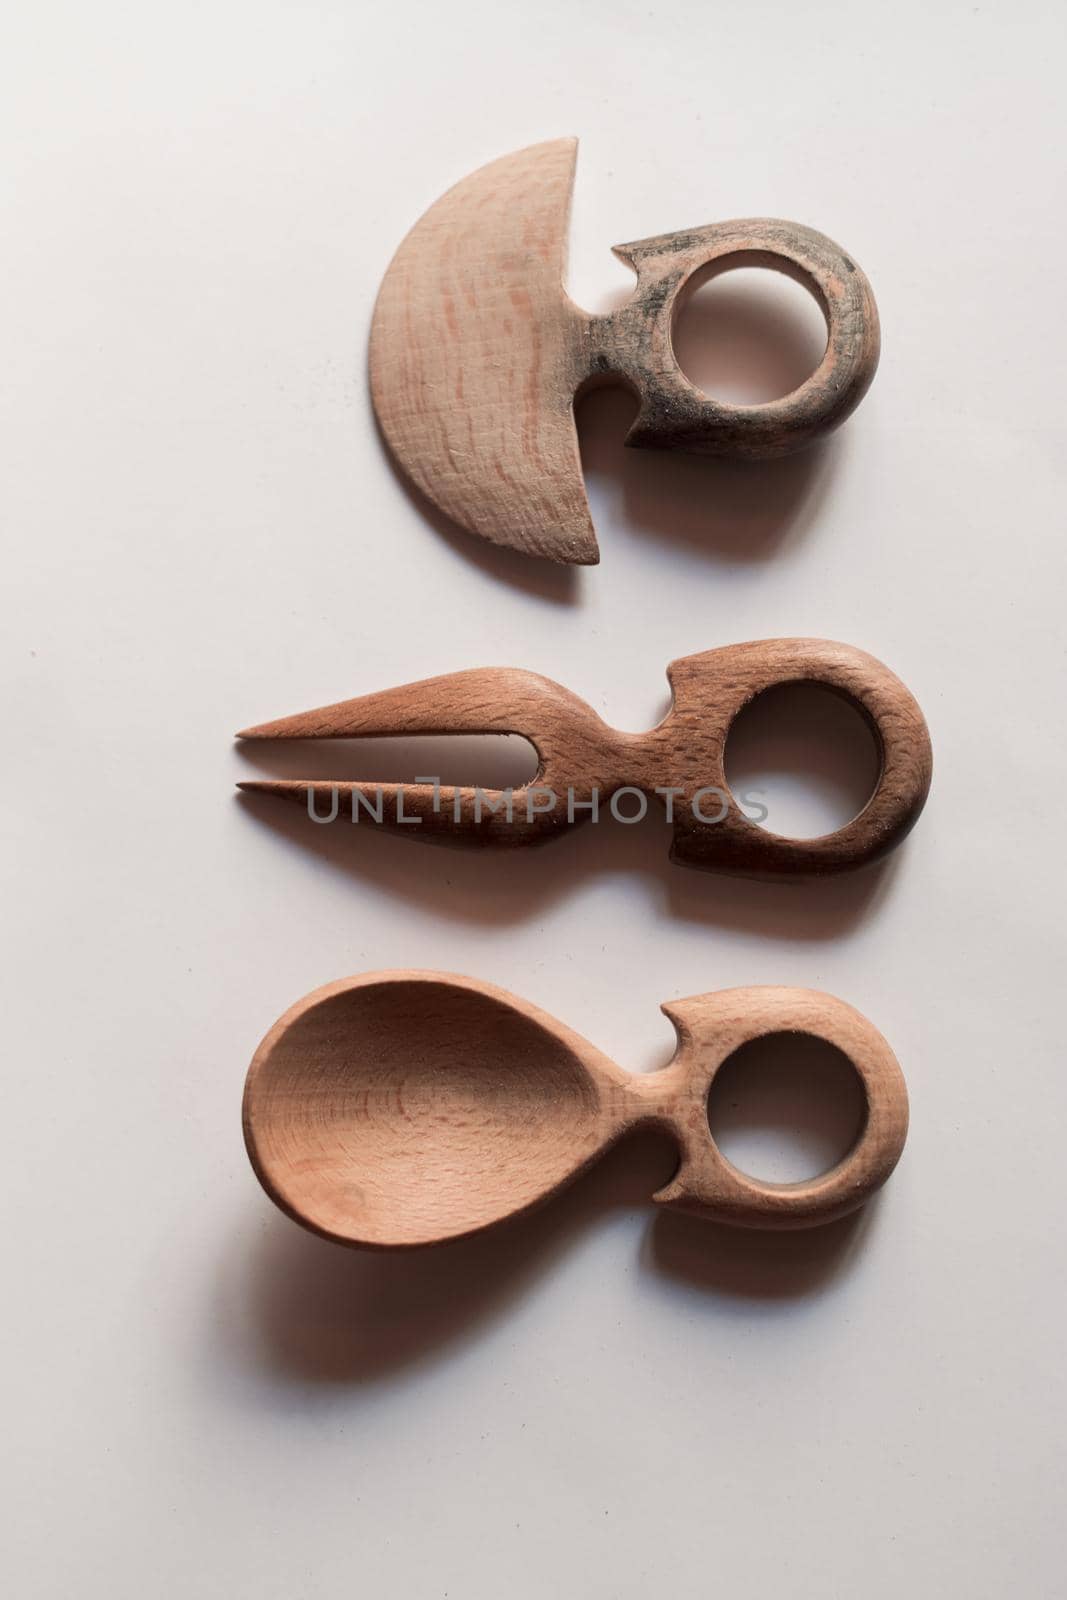 Handmade Wooden Spoons for hiking and outdoor activities. Craftsmanship and artisan concept by dotshock